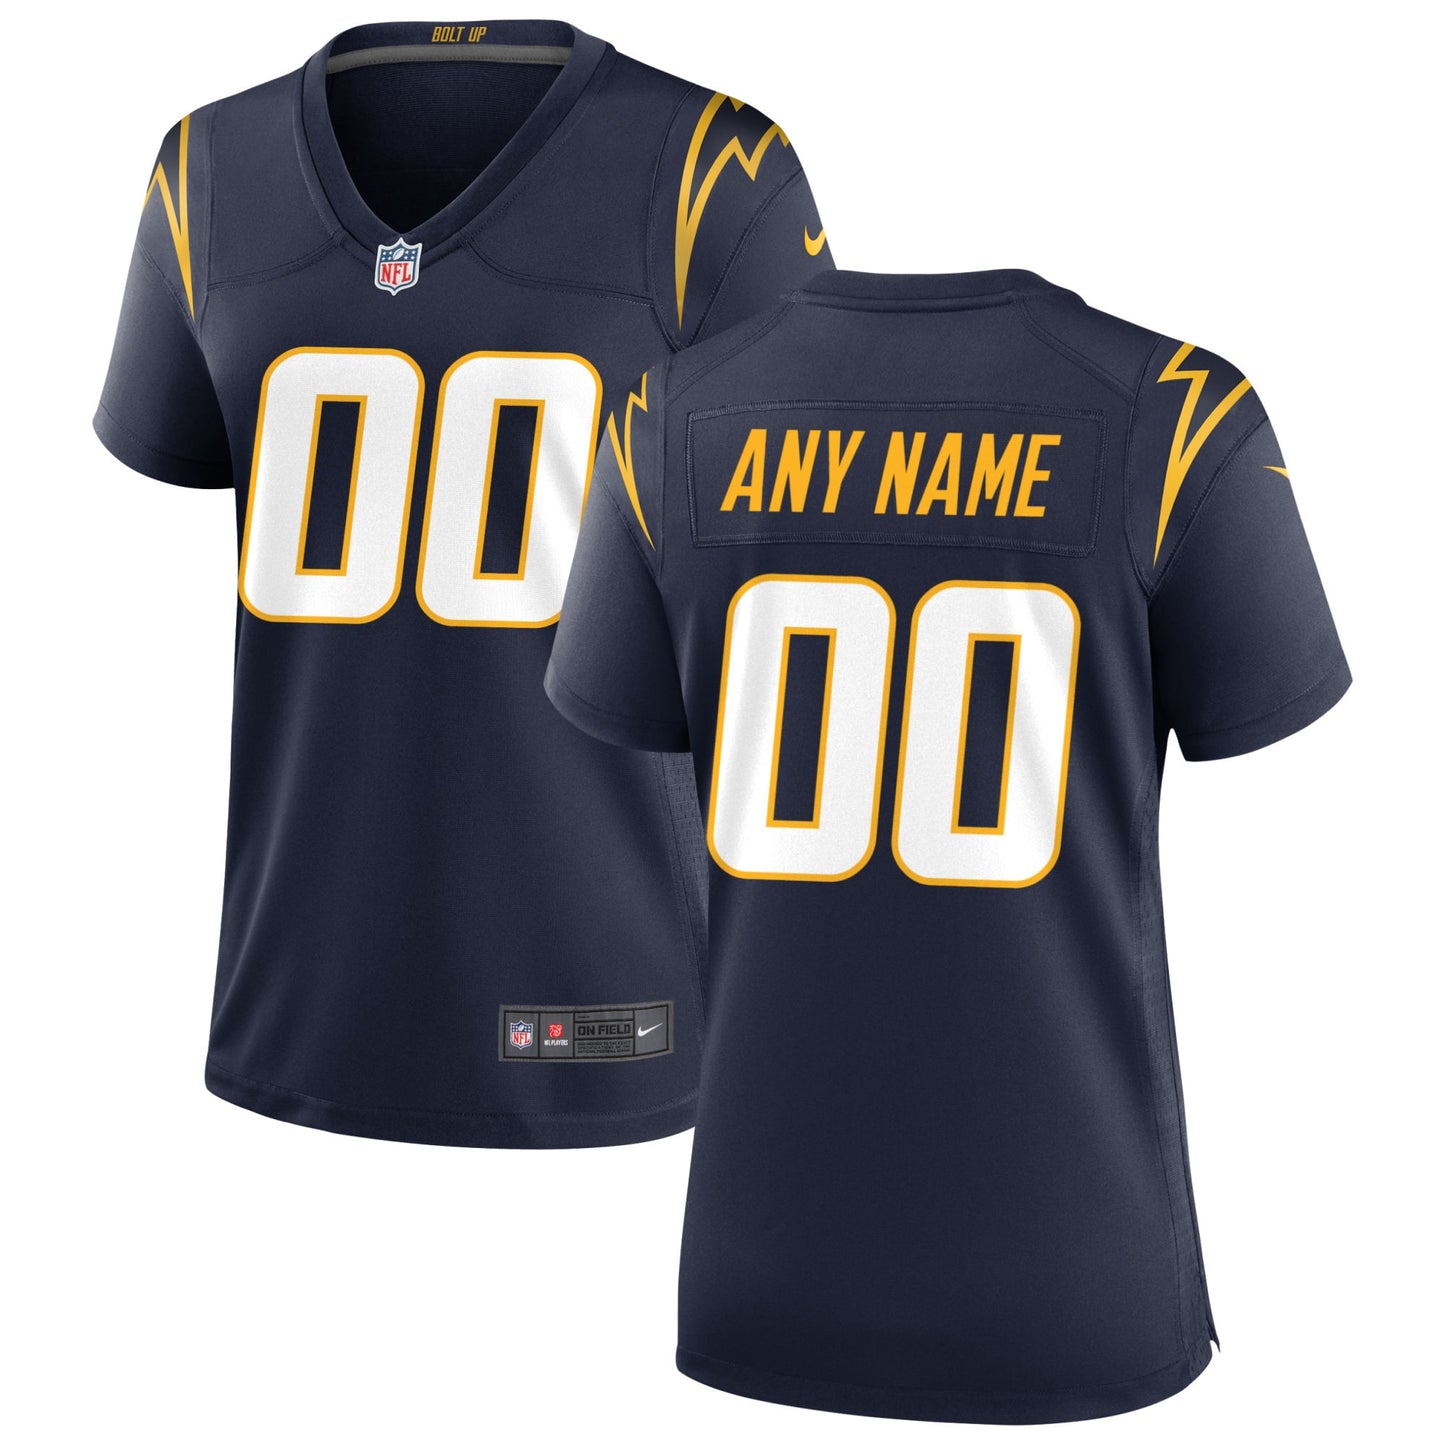 Los Angeles Chargers Nike Women's Alternate Custom Game Jersey - Navy